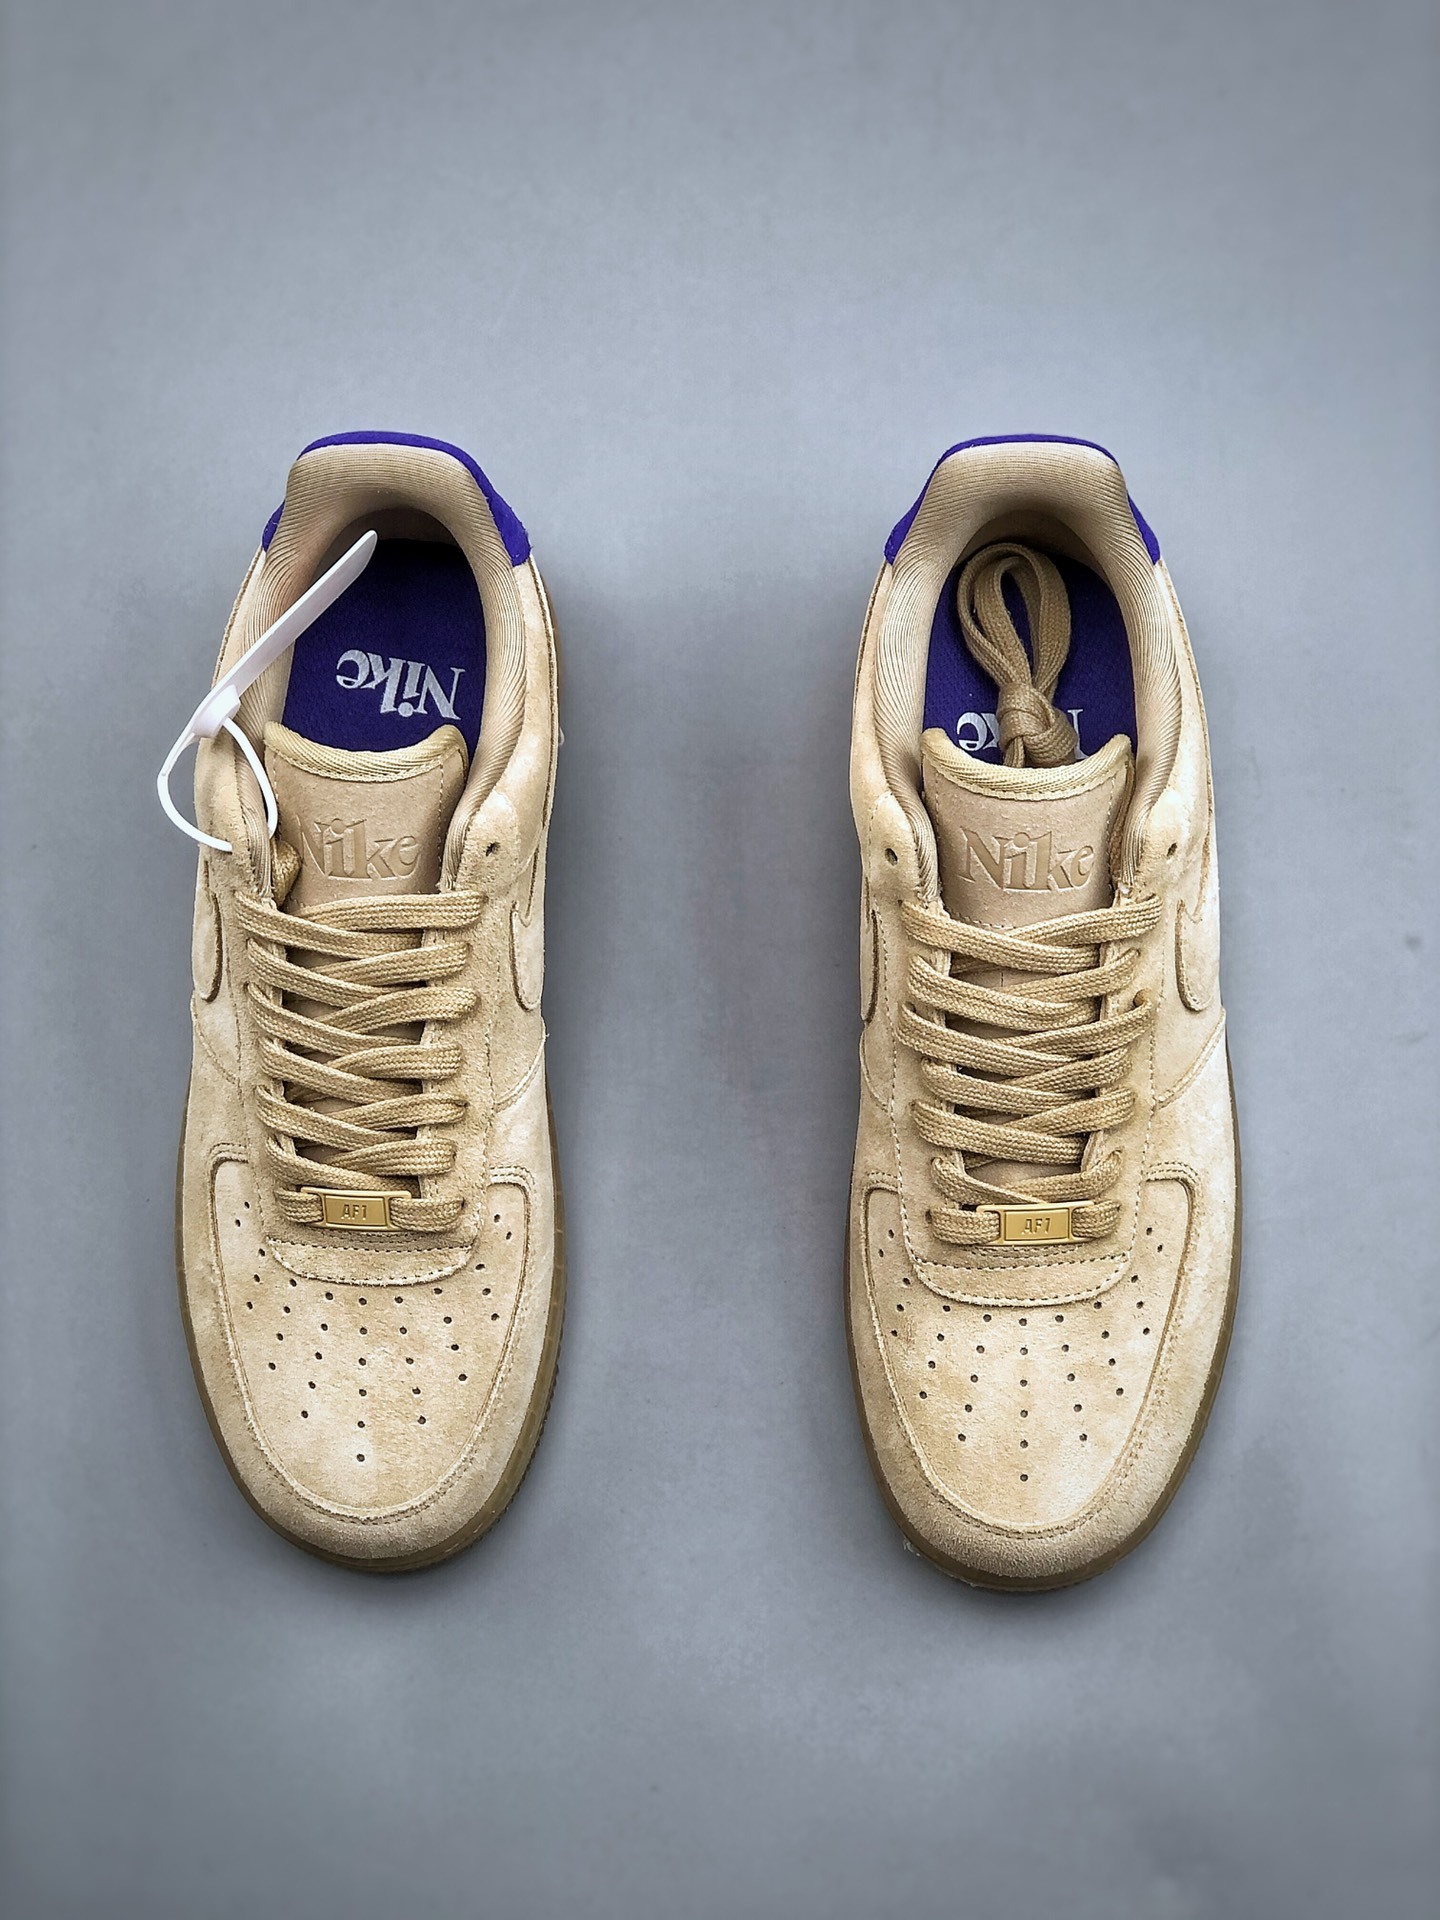 Nike Air Force 1 '07 low "Grain". Purchase the best quality and price of the Nike Air Force 1 online. Nike Air Force 1 Low 07 . Purchase the best quality and price of the Nike Air Force 1 online. 30,Nike Air Force 1 Low 07 x BAPE,Nike,shoes